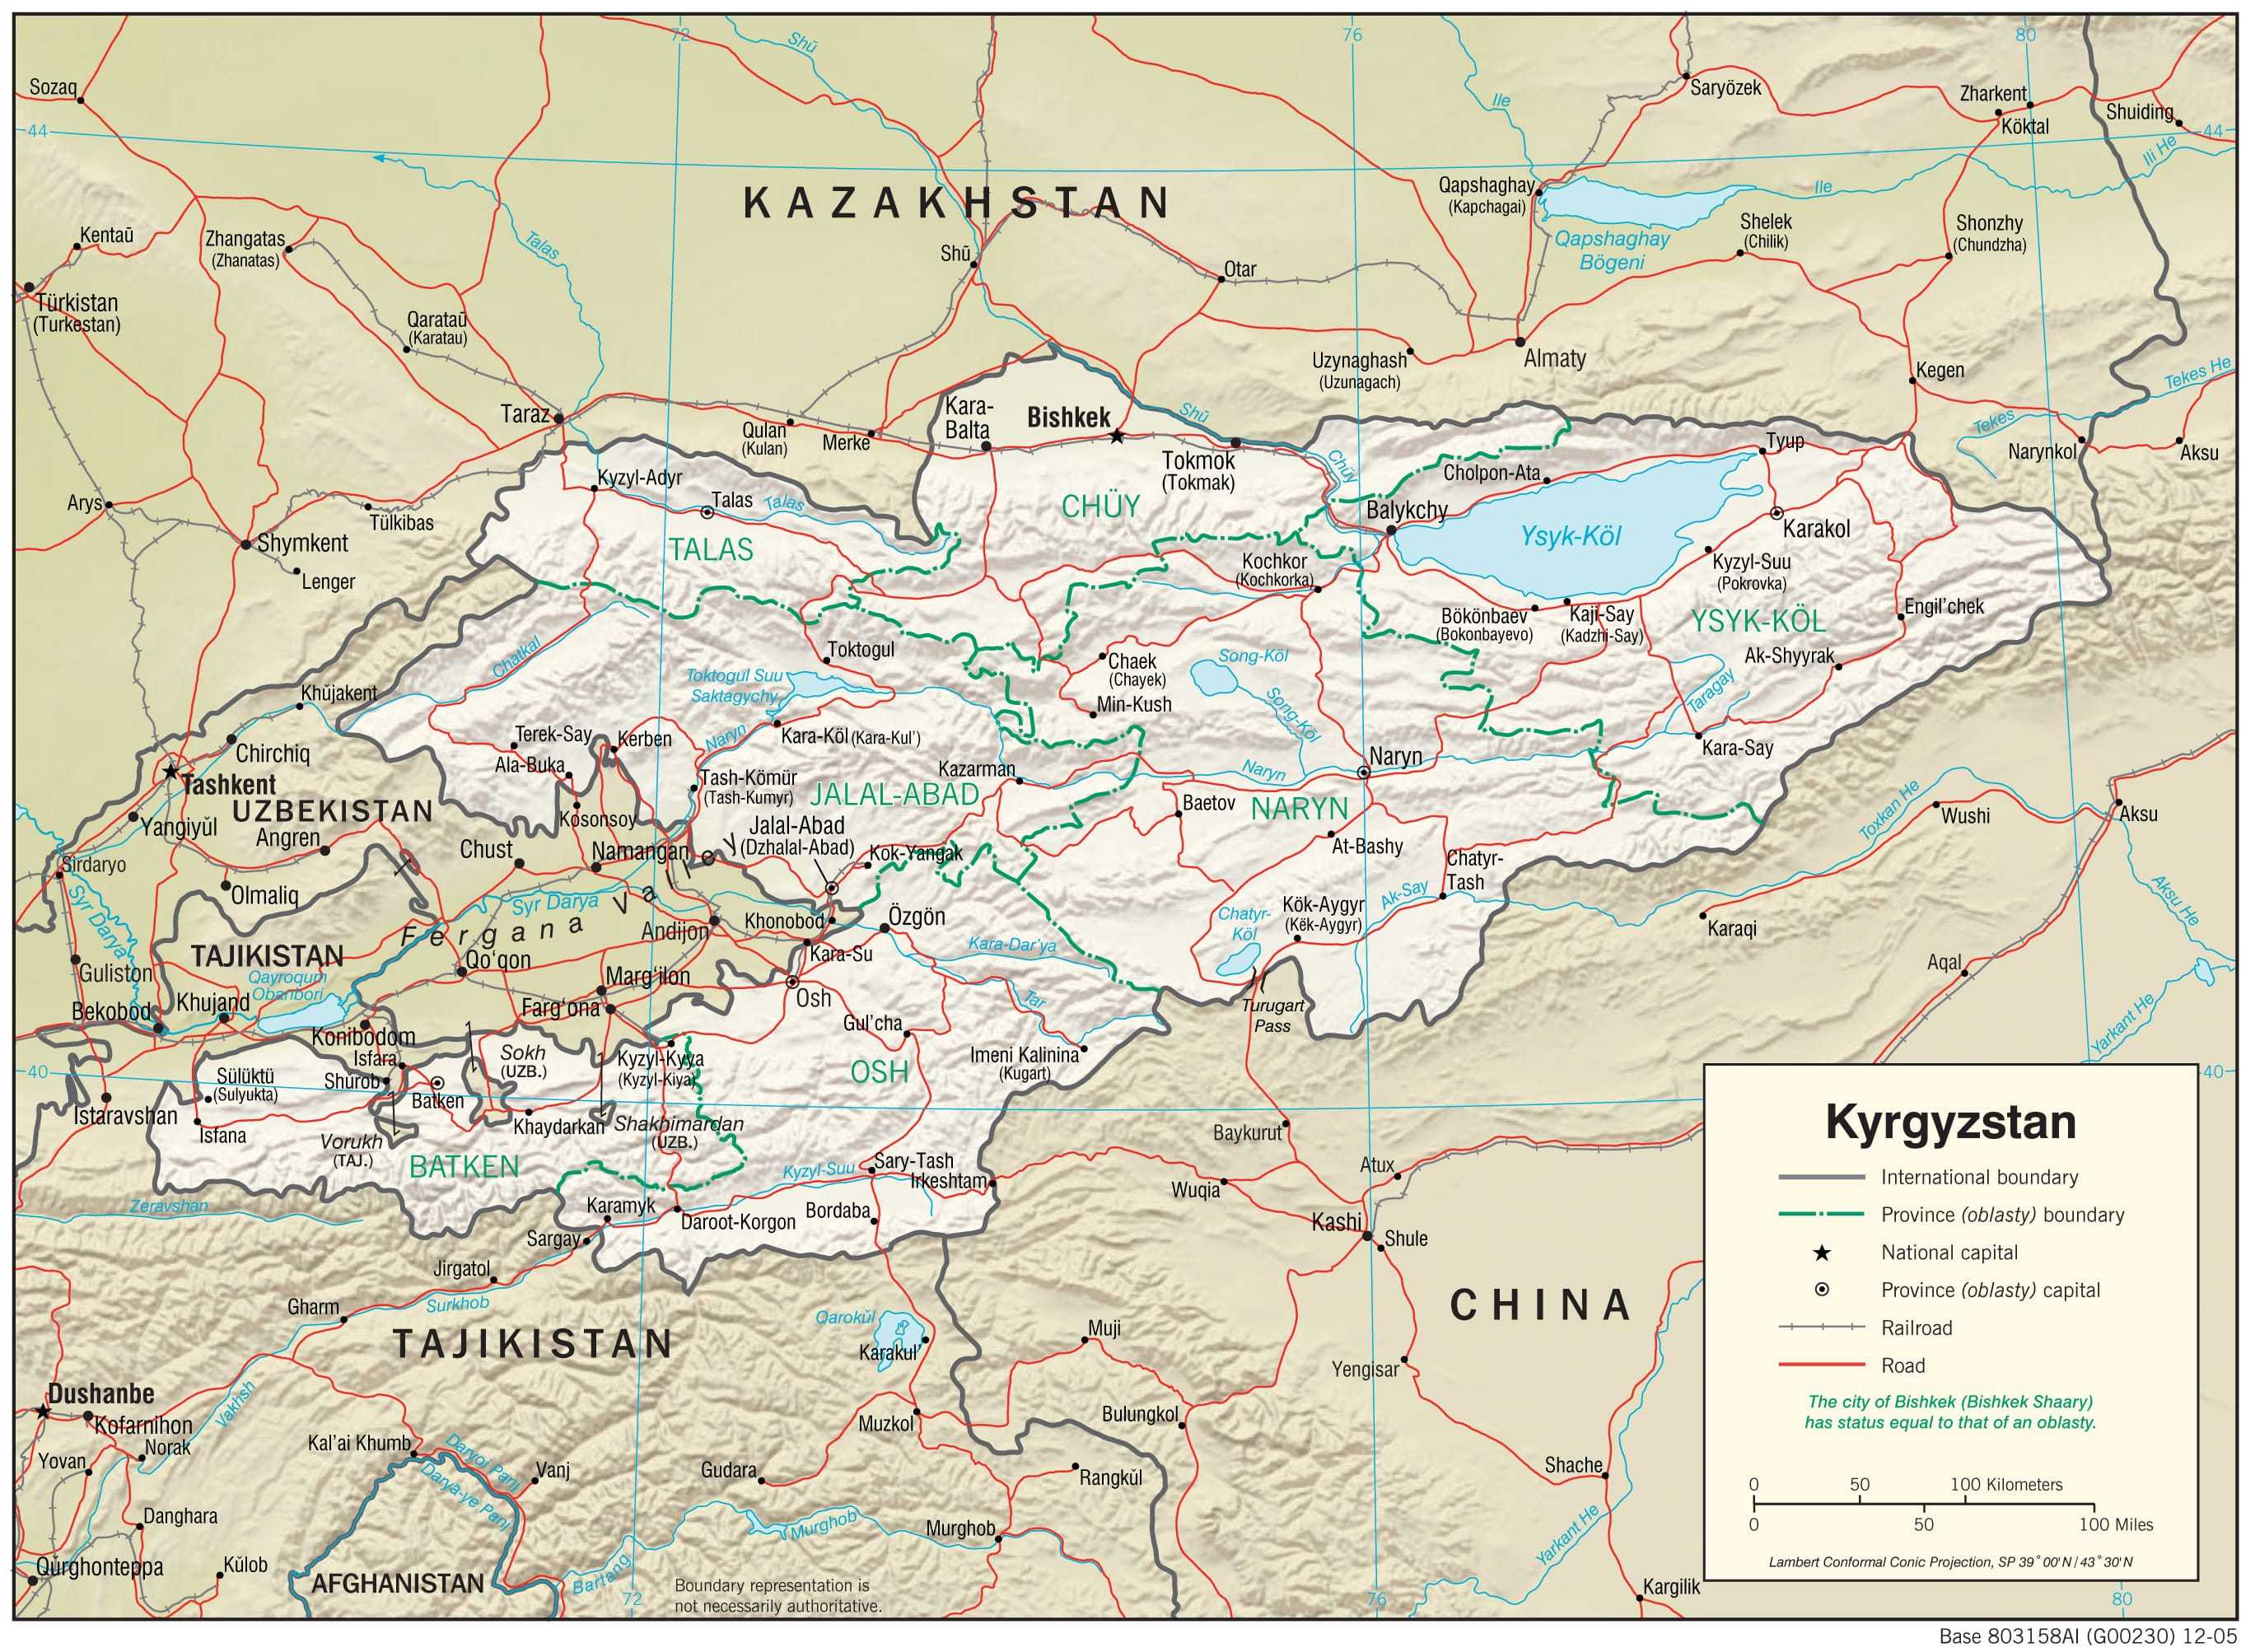 Physiographical map of Kyrgyzstan.